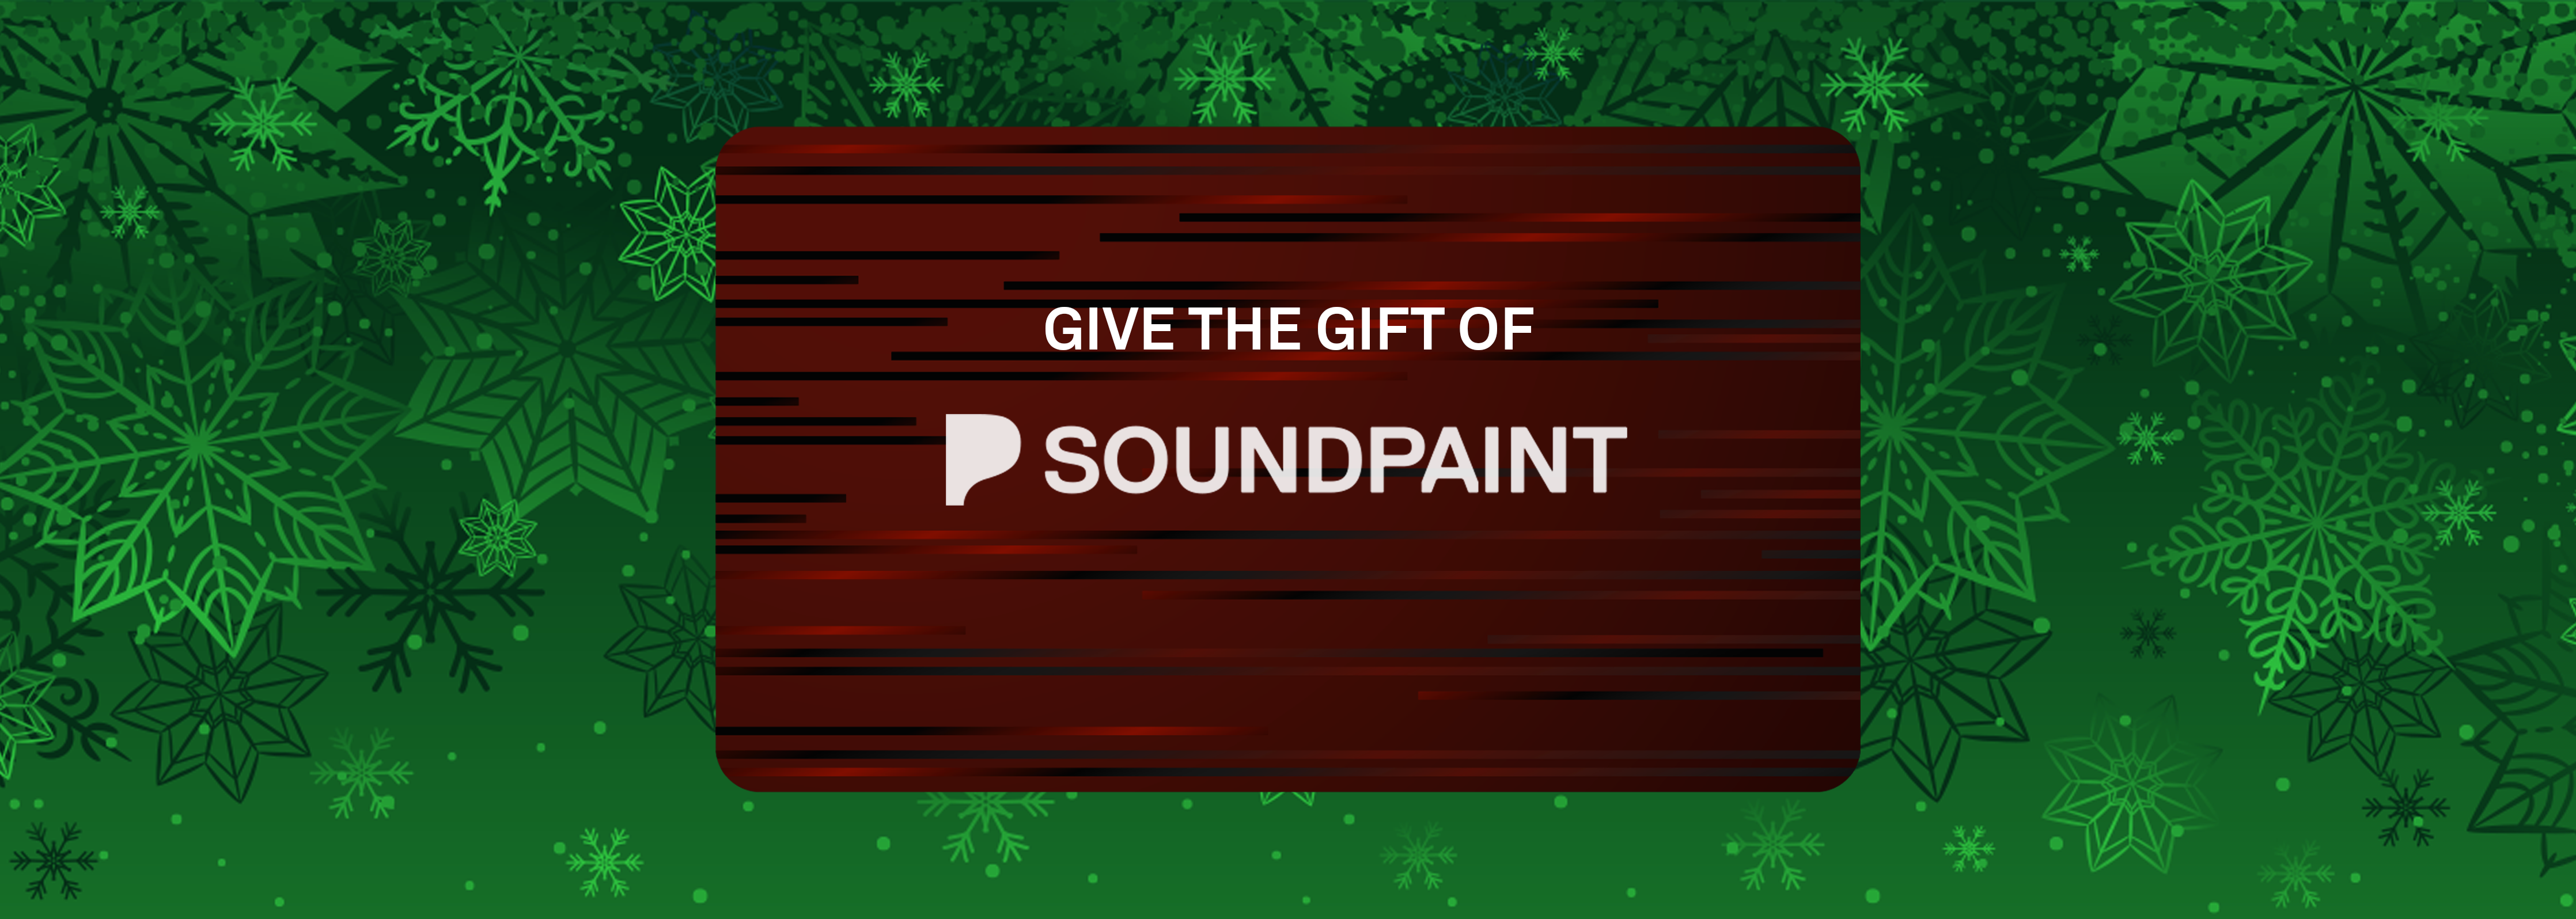 Soundpaint Gift Card